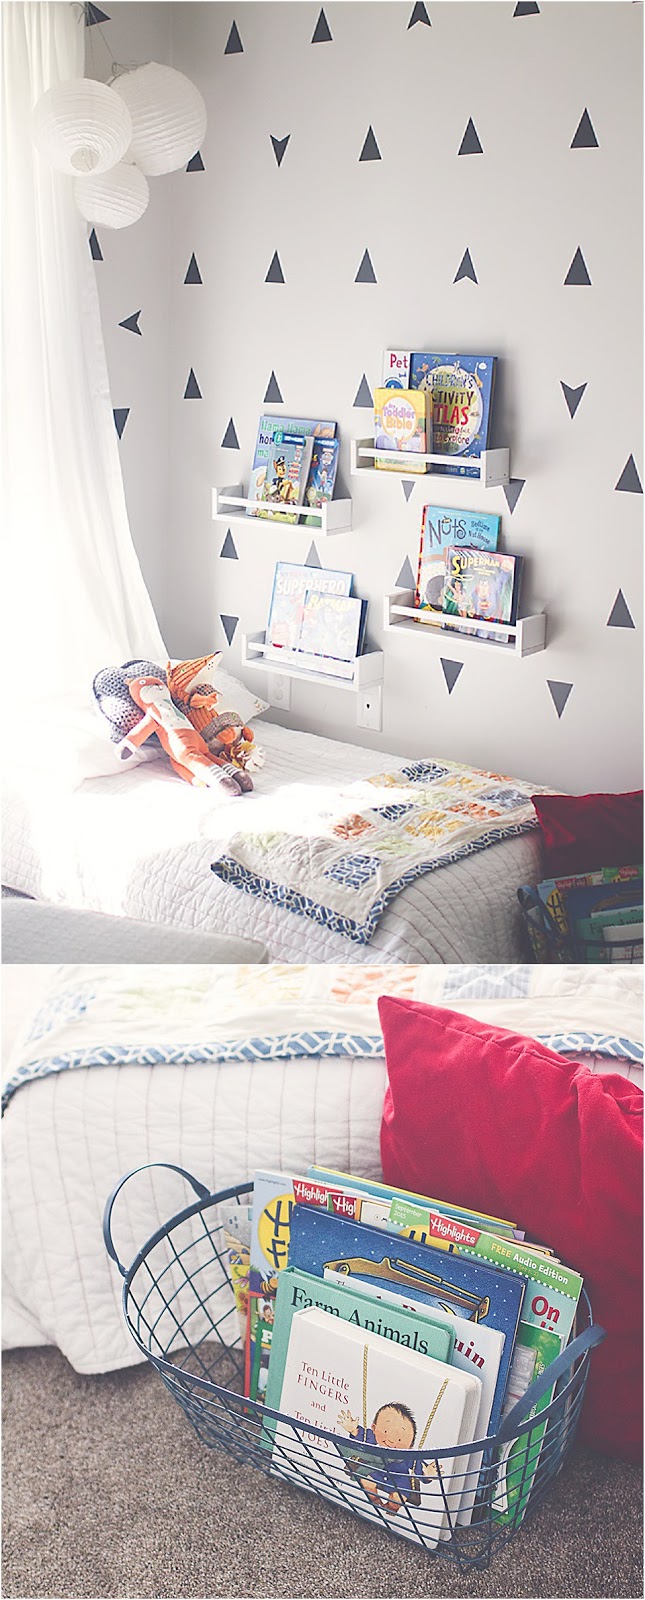 Home Tour: Boys Bedroom Decor | A Modern Classic shared space for Toddler/Preschool boys | Bright, clean & functional with both nautical and whimsical influences.